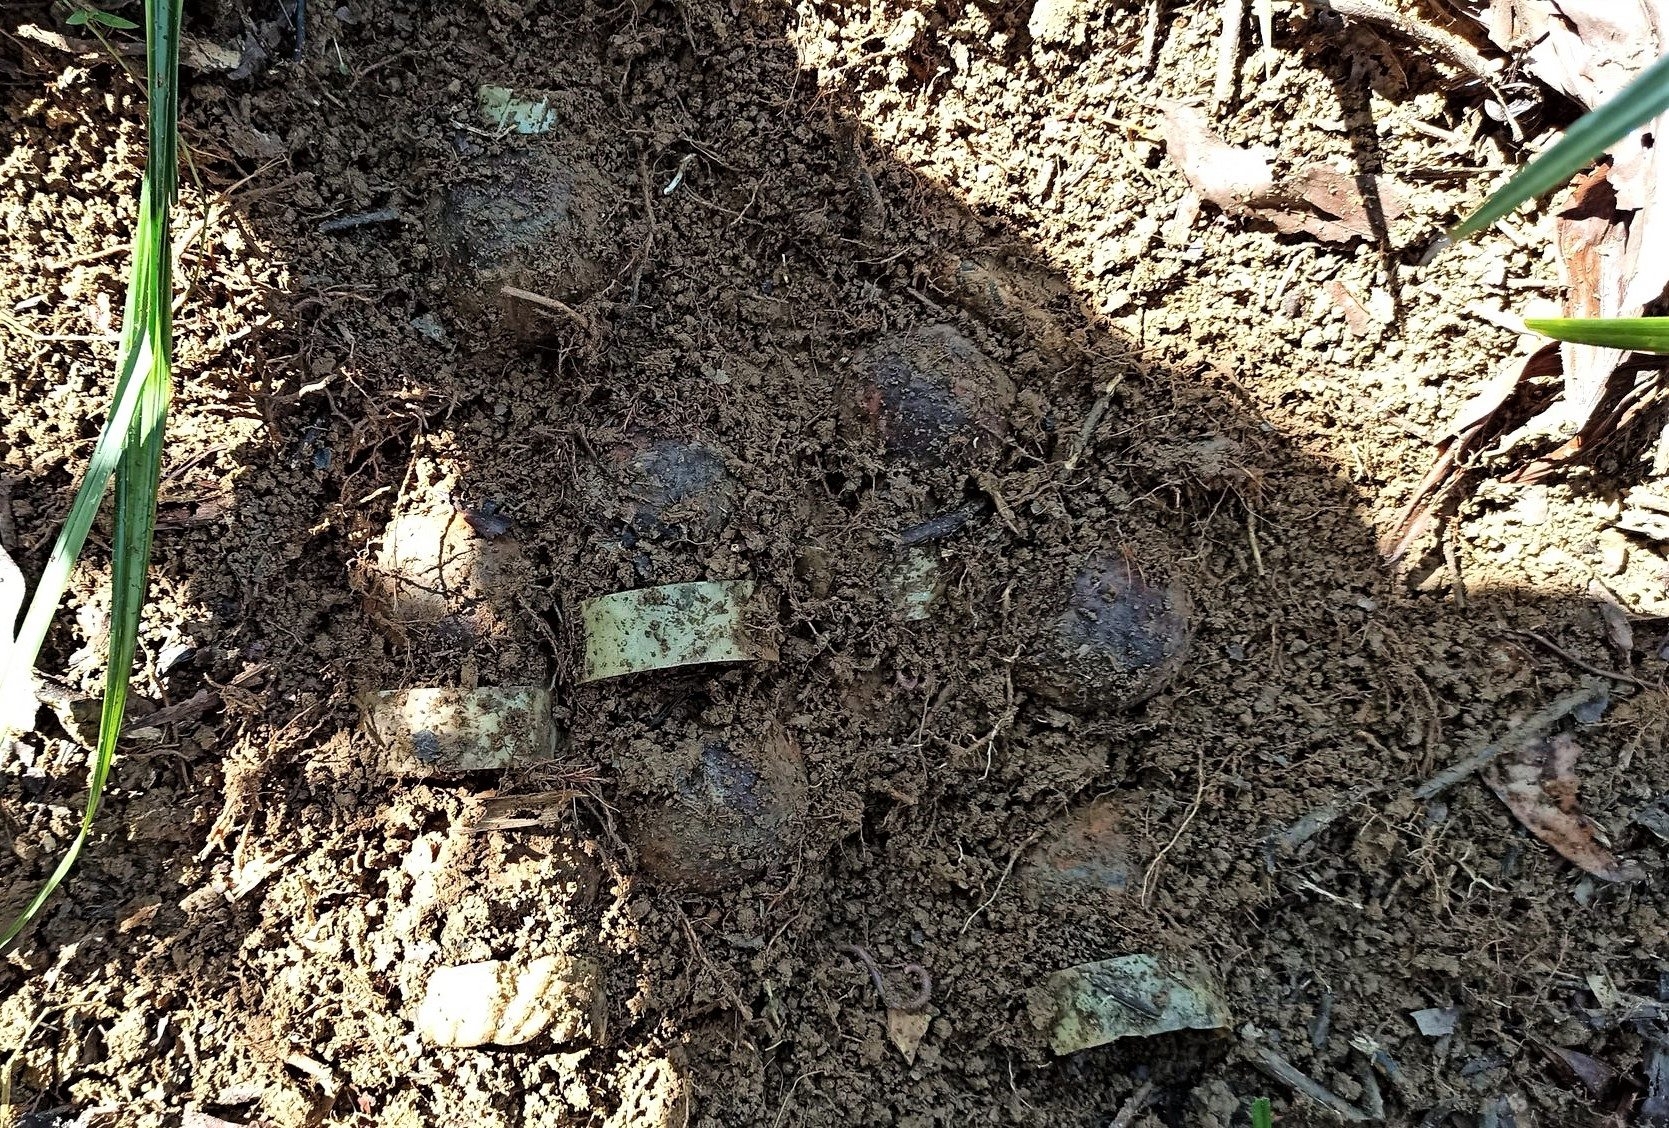 Nearly 100 cluster munitions found in Thua Thien Hue